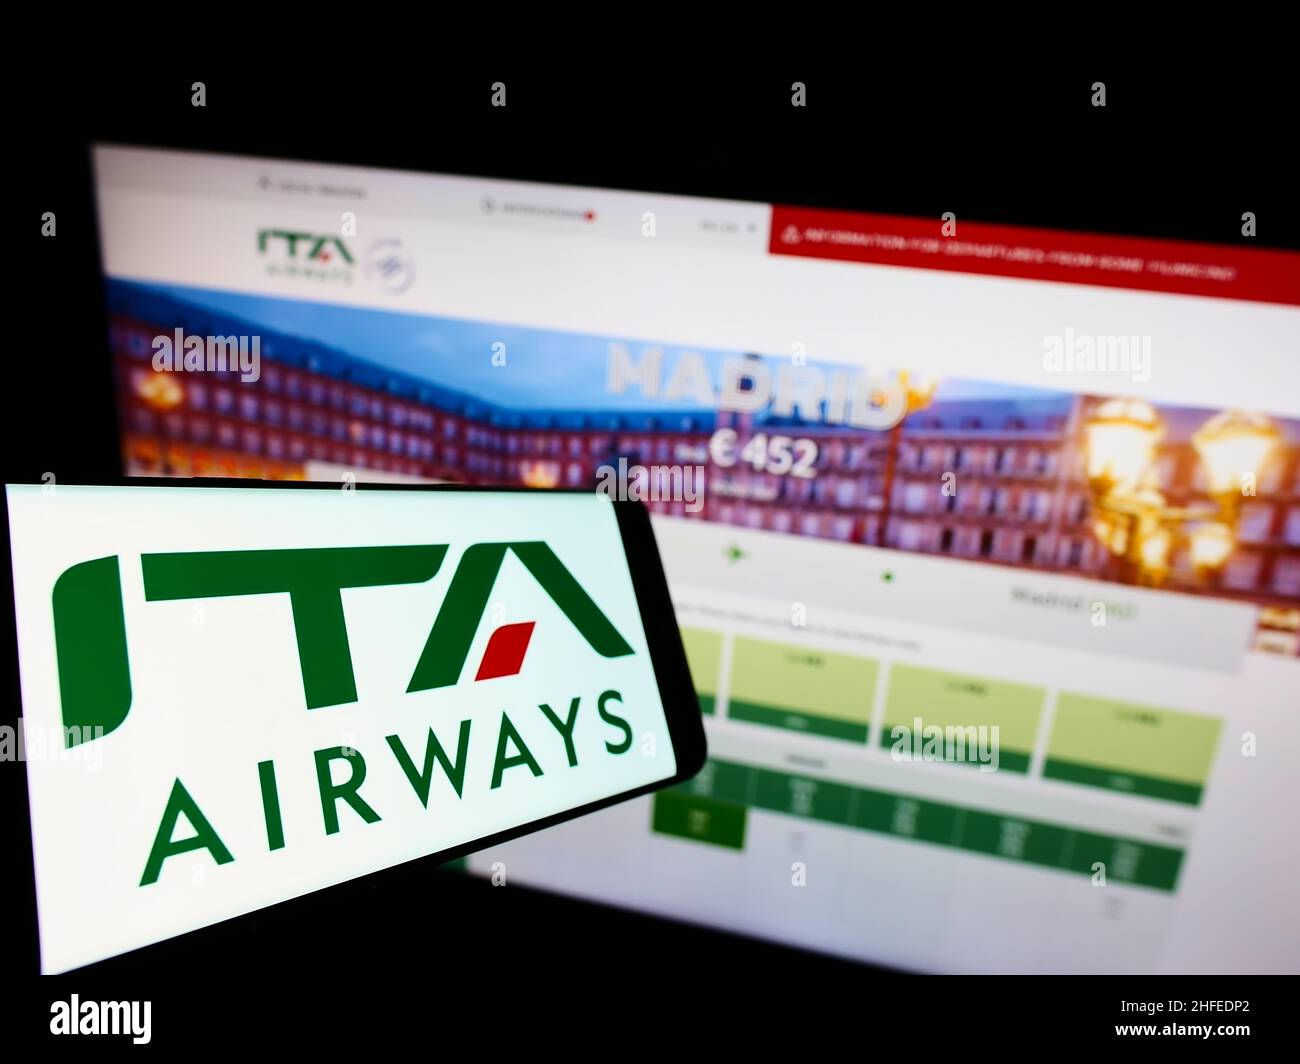 Smartphone with logo of airline company Italia Trasporto Aereo SpA (ITA Airways) on screen in front of website. Focus on center of phone display. Stock Photo